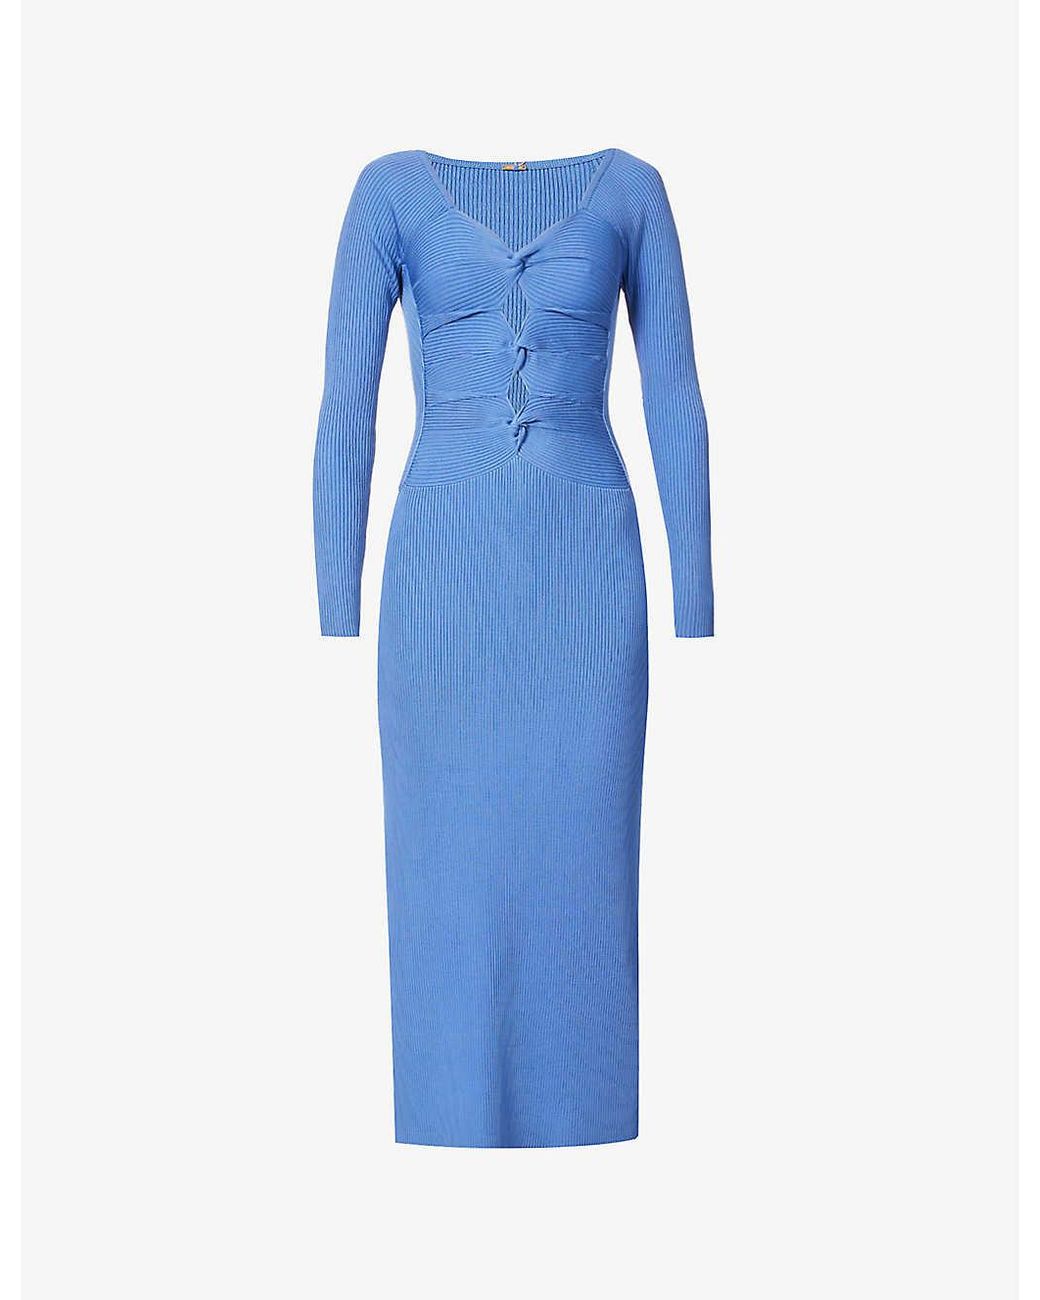 Cult Gaia Melissa Cut-out Knitted Midi Dress in Blue | Lyst